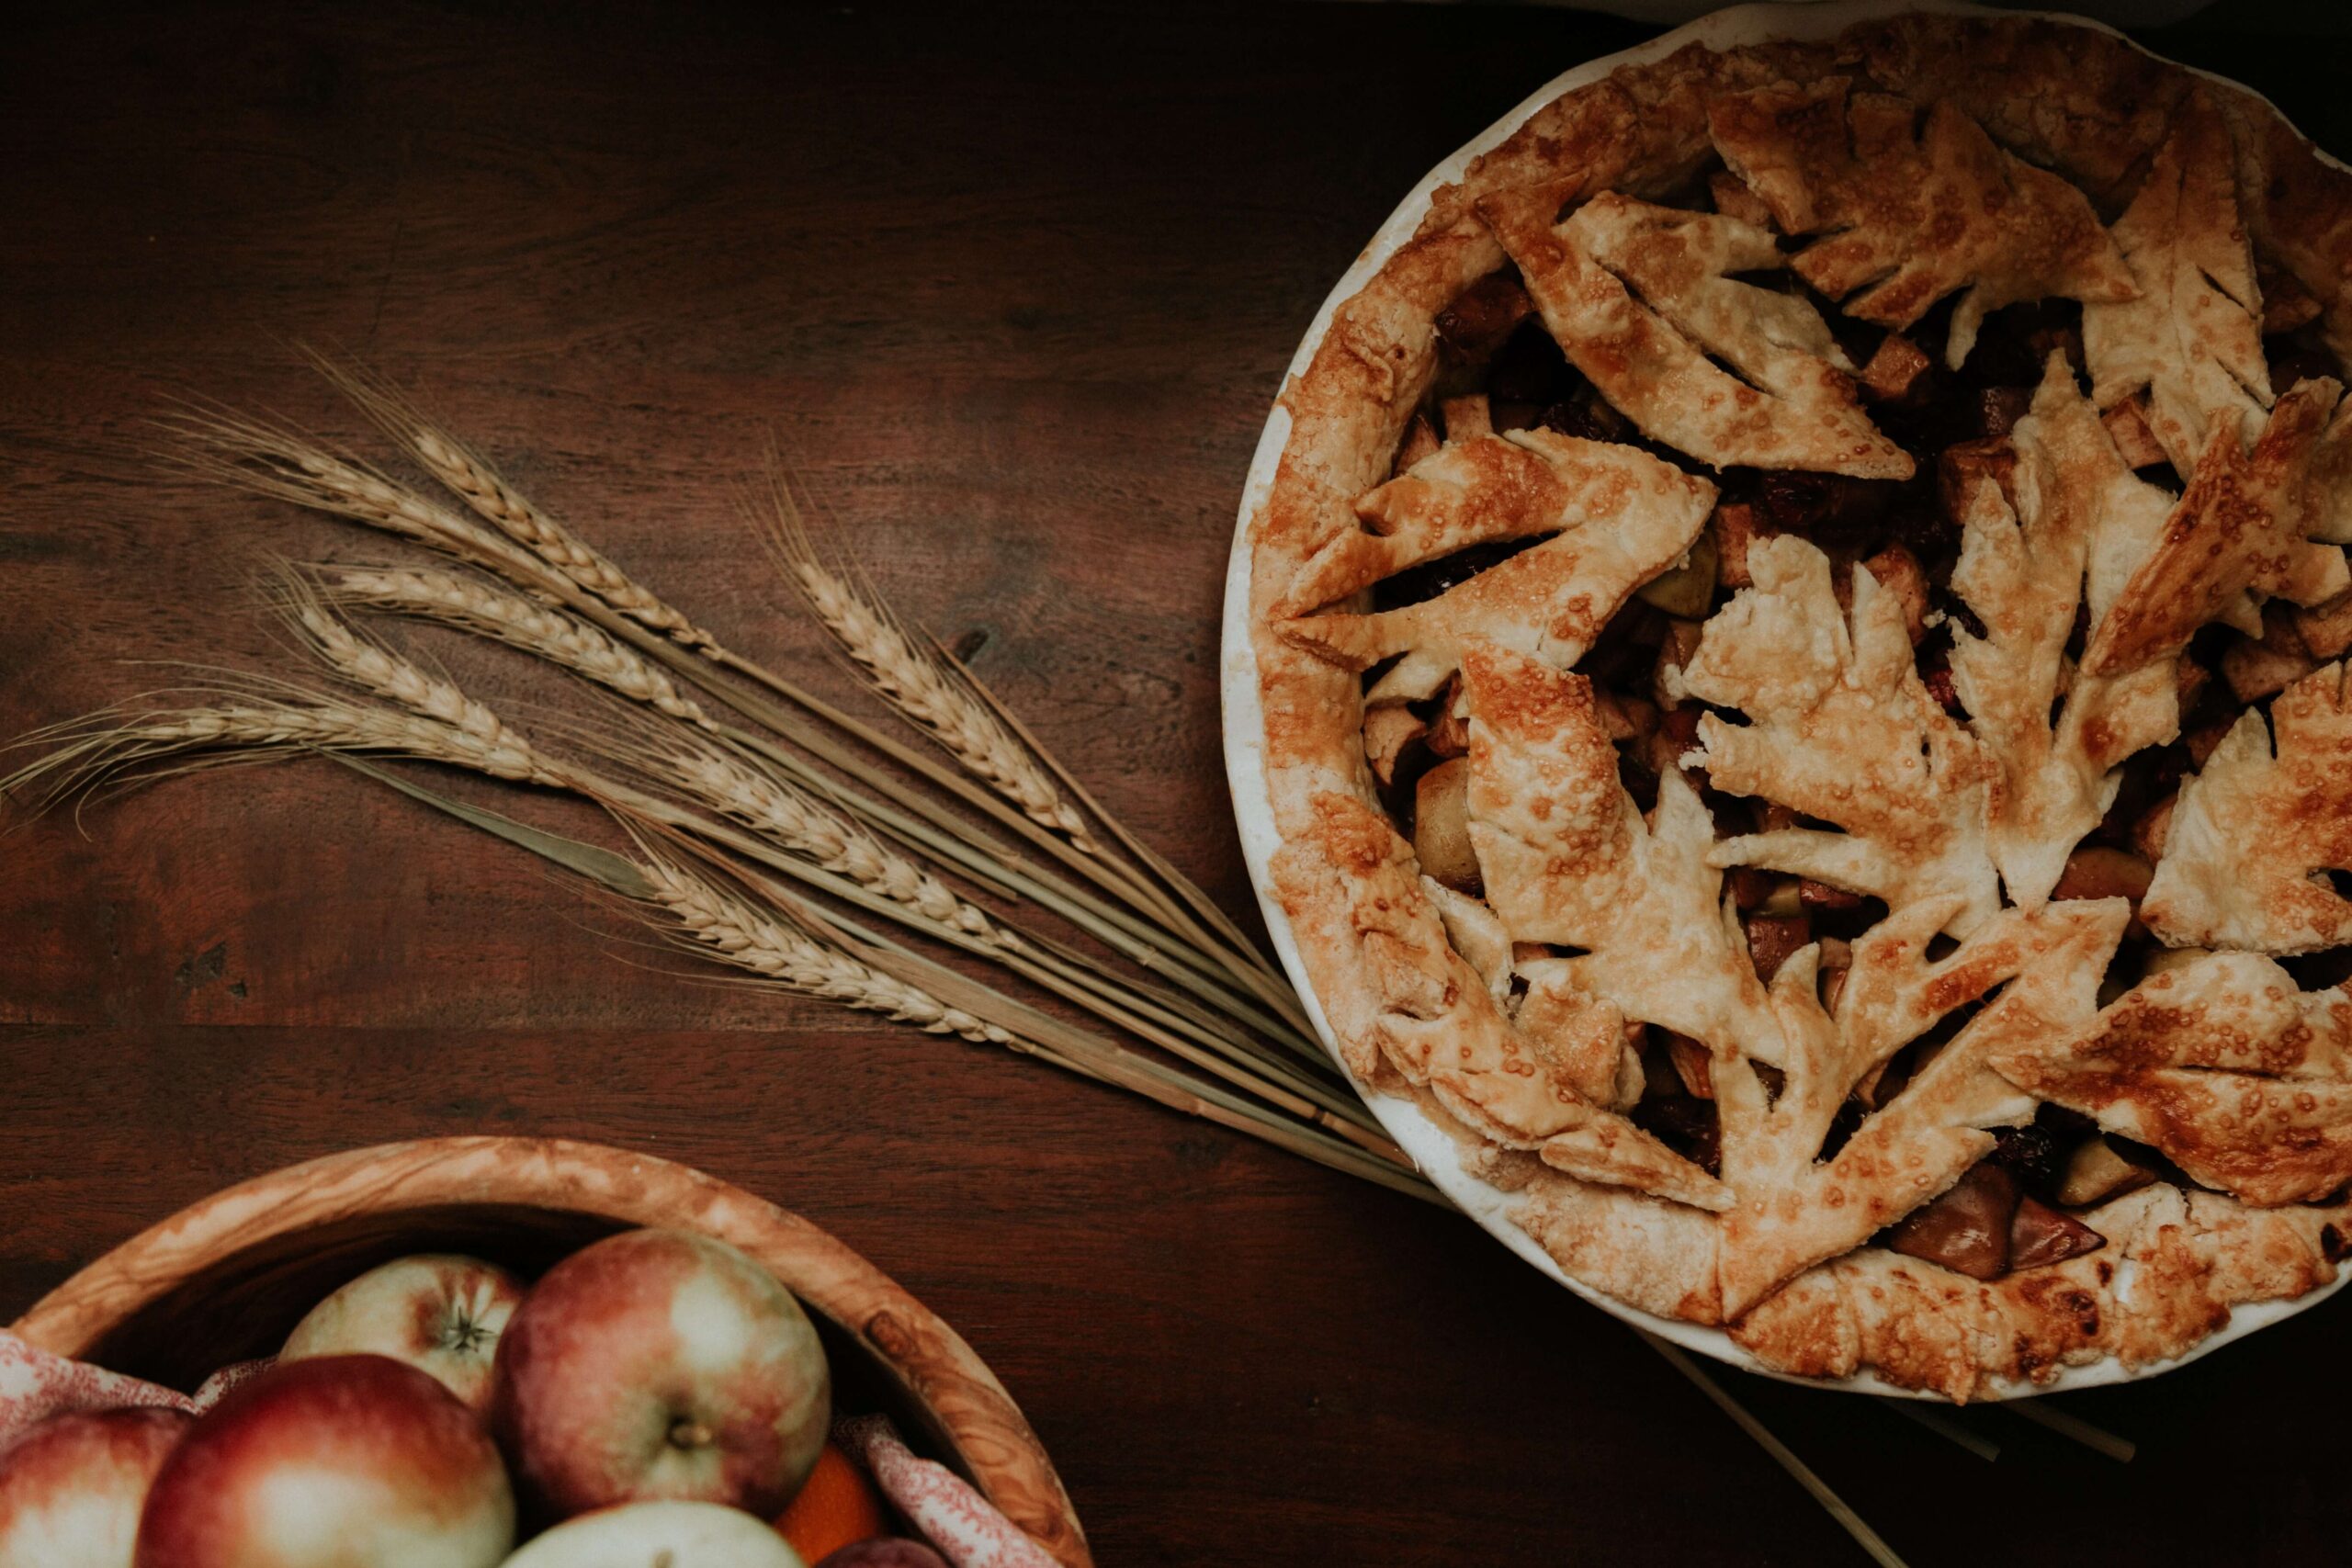 An image of a pie with wheat on the side and apples in a bowl in the bottom left corner